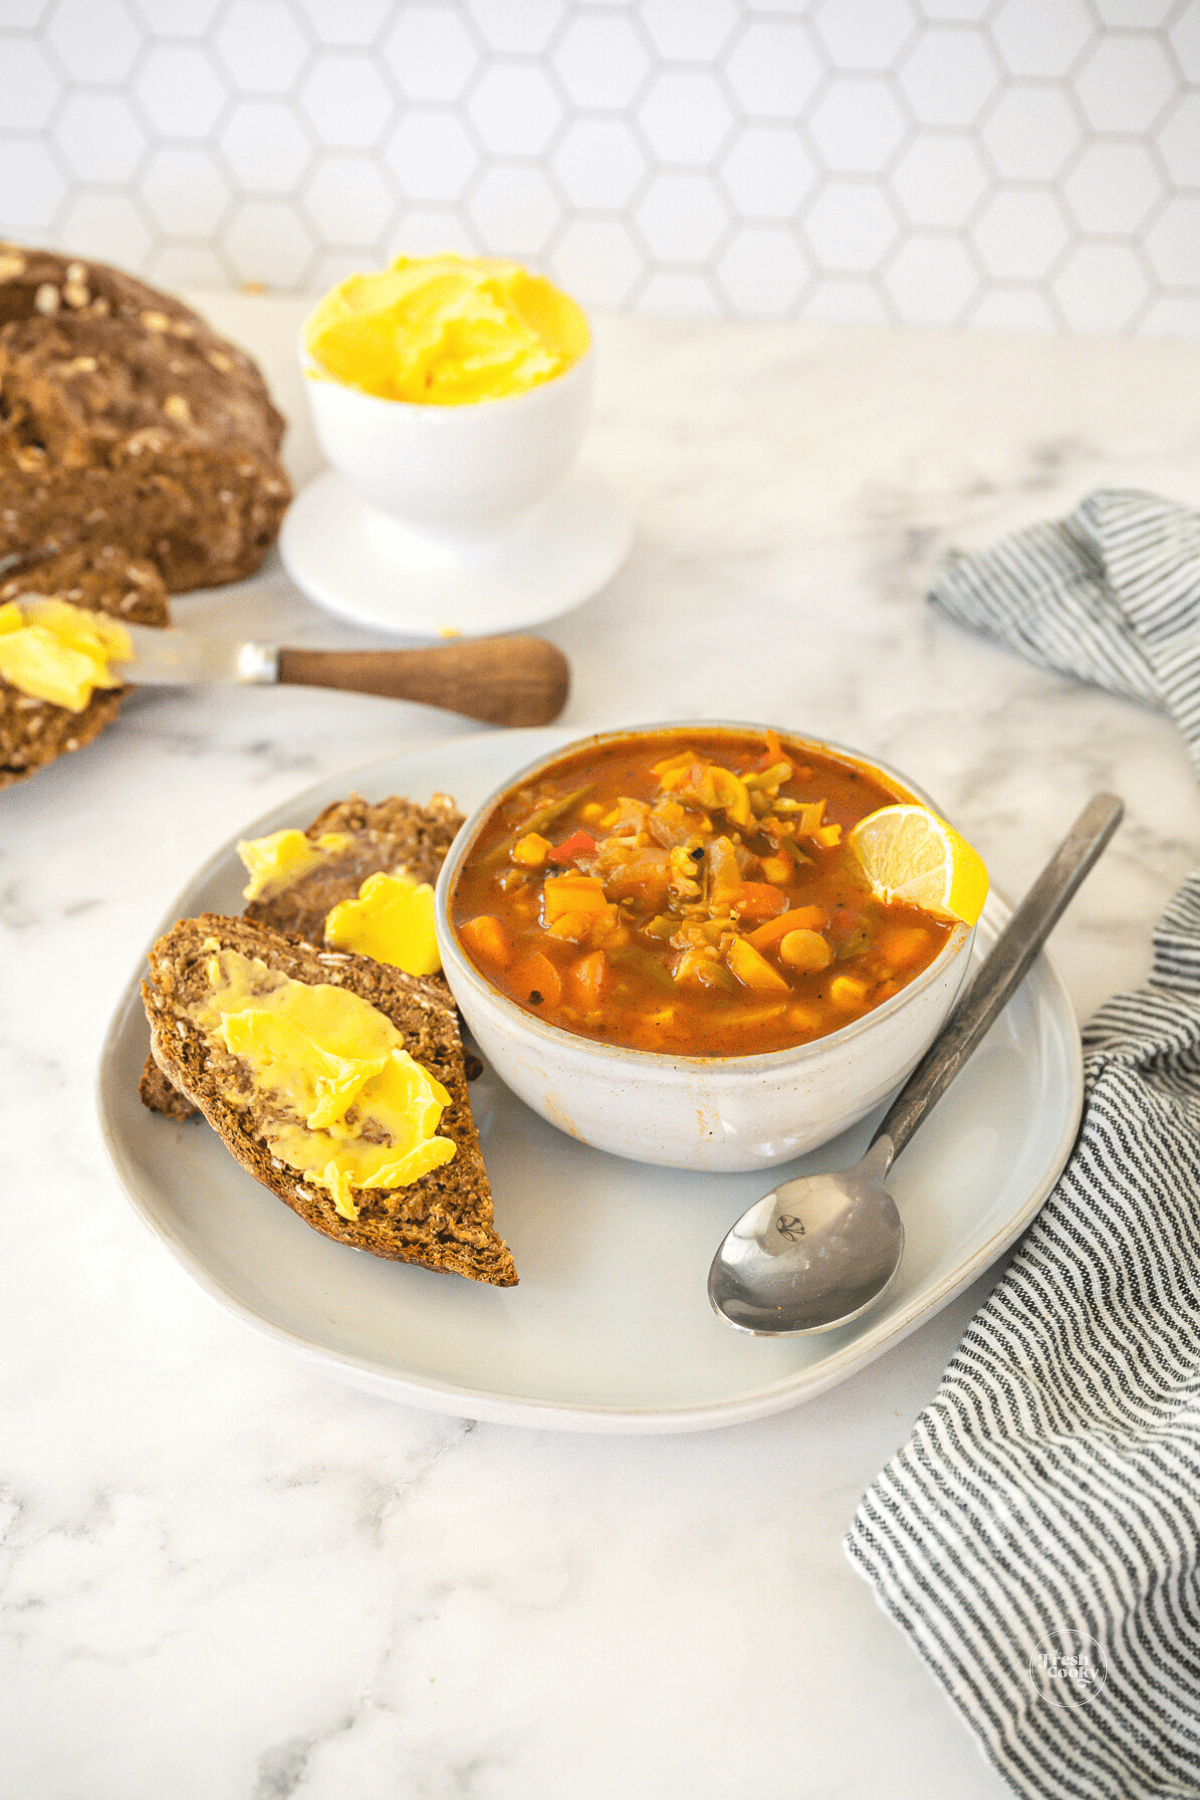 Serving of Irish brown bread with a bowl of hearty vegetable soup.